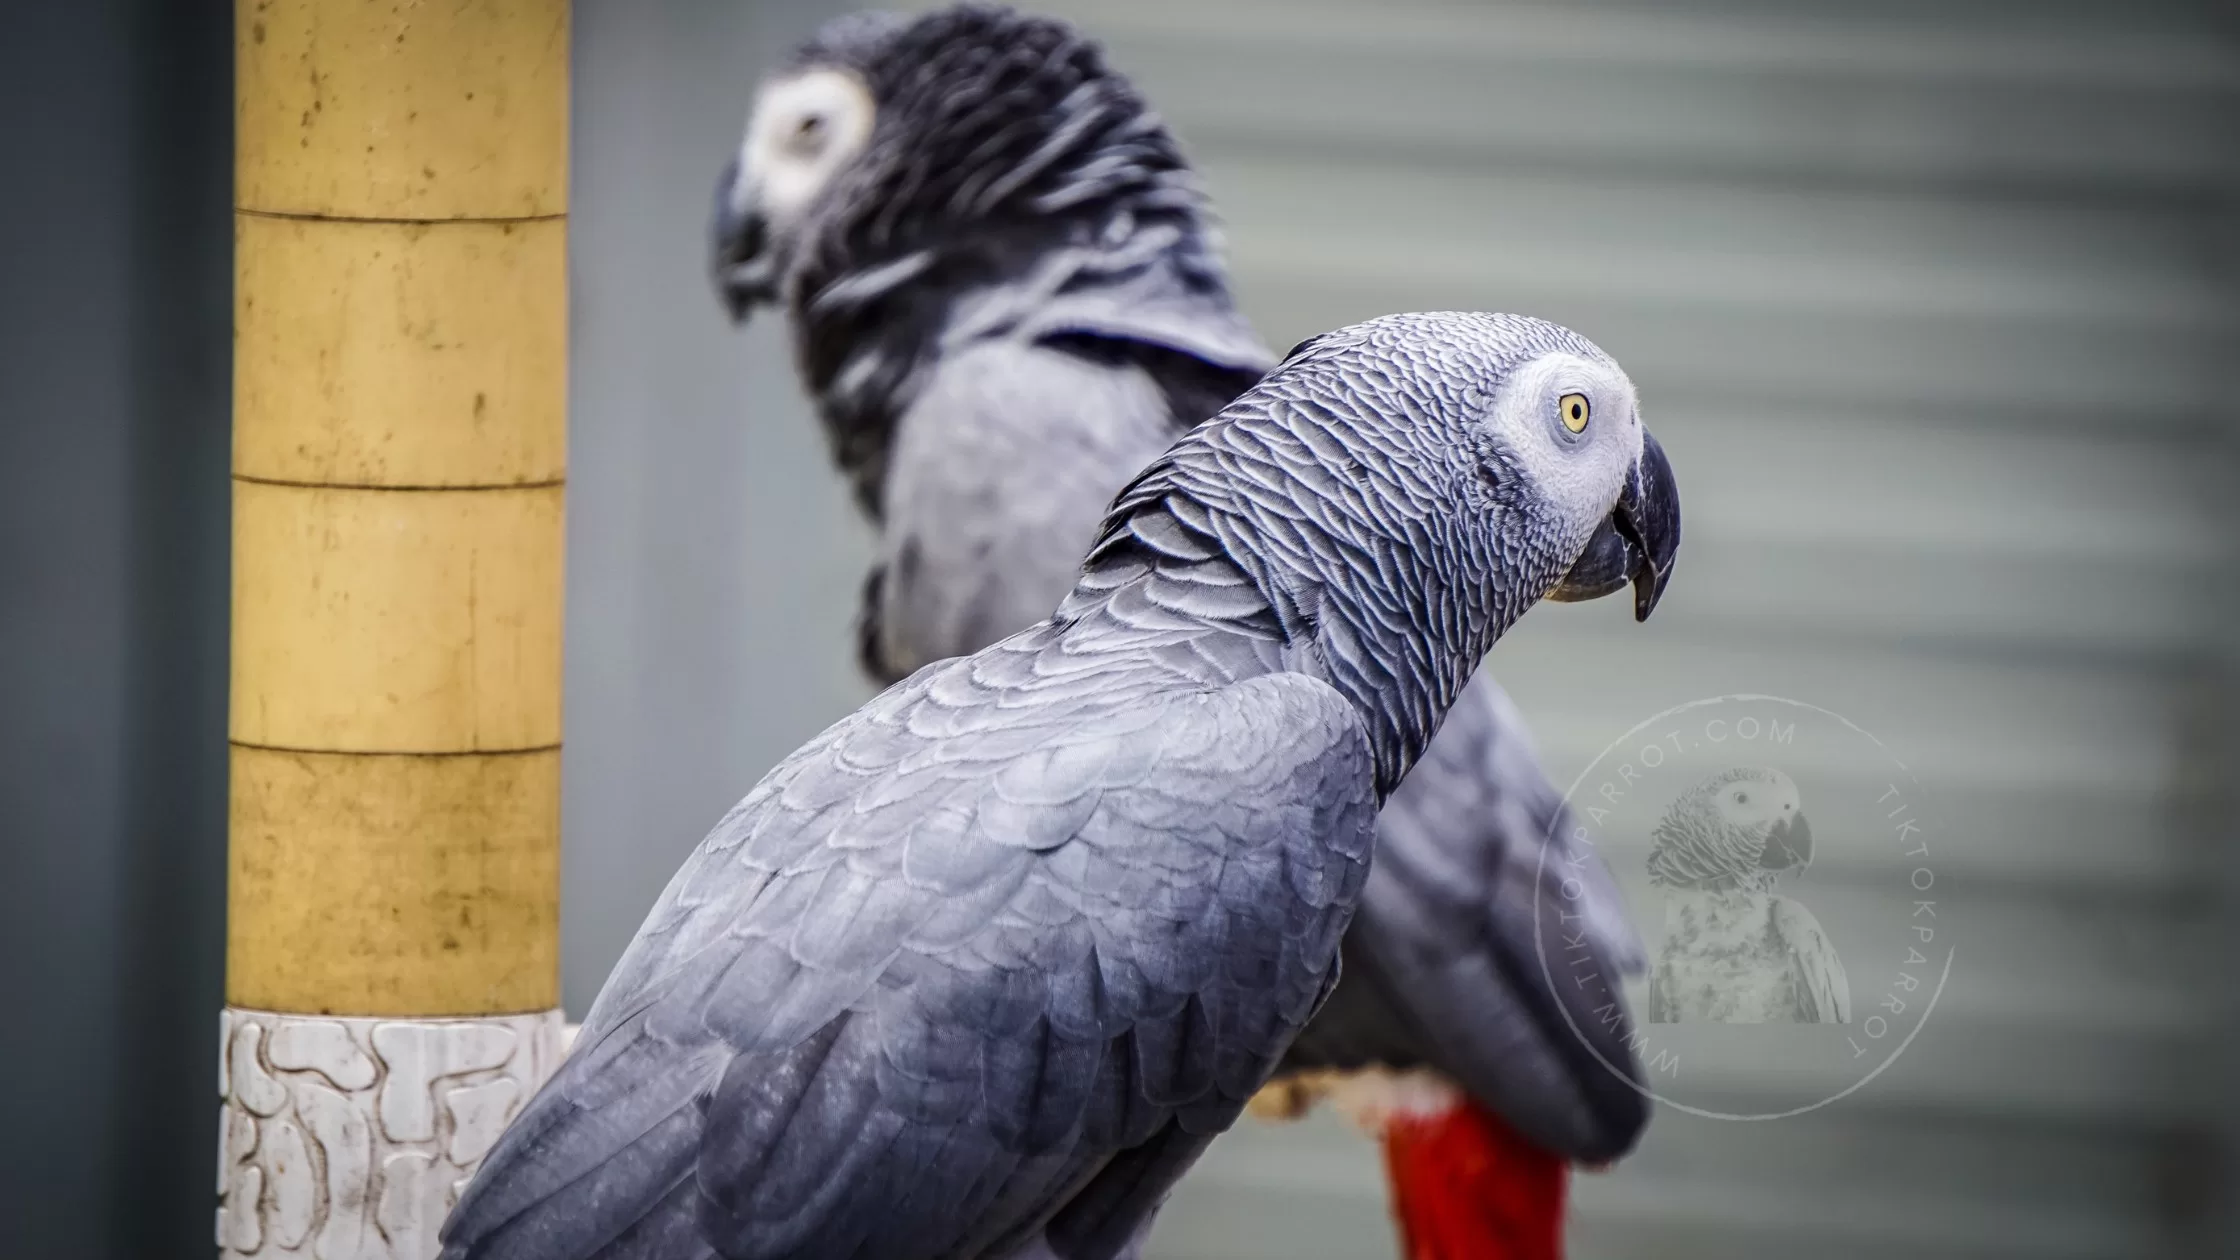 African Grey Parrot Male or Female? (Determine Gender of African Grey)